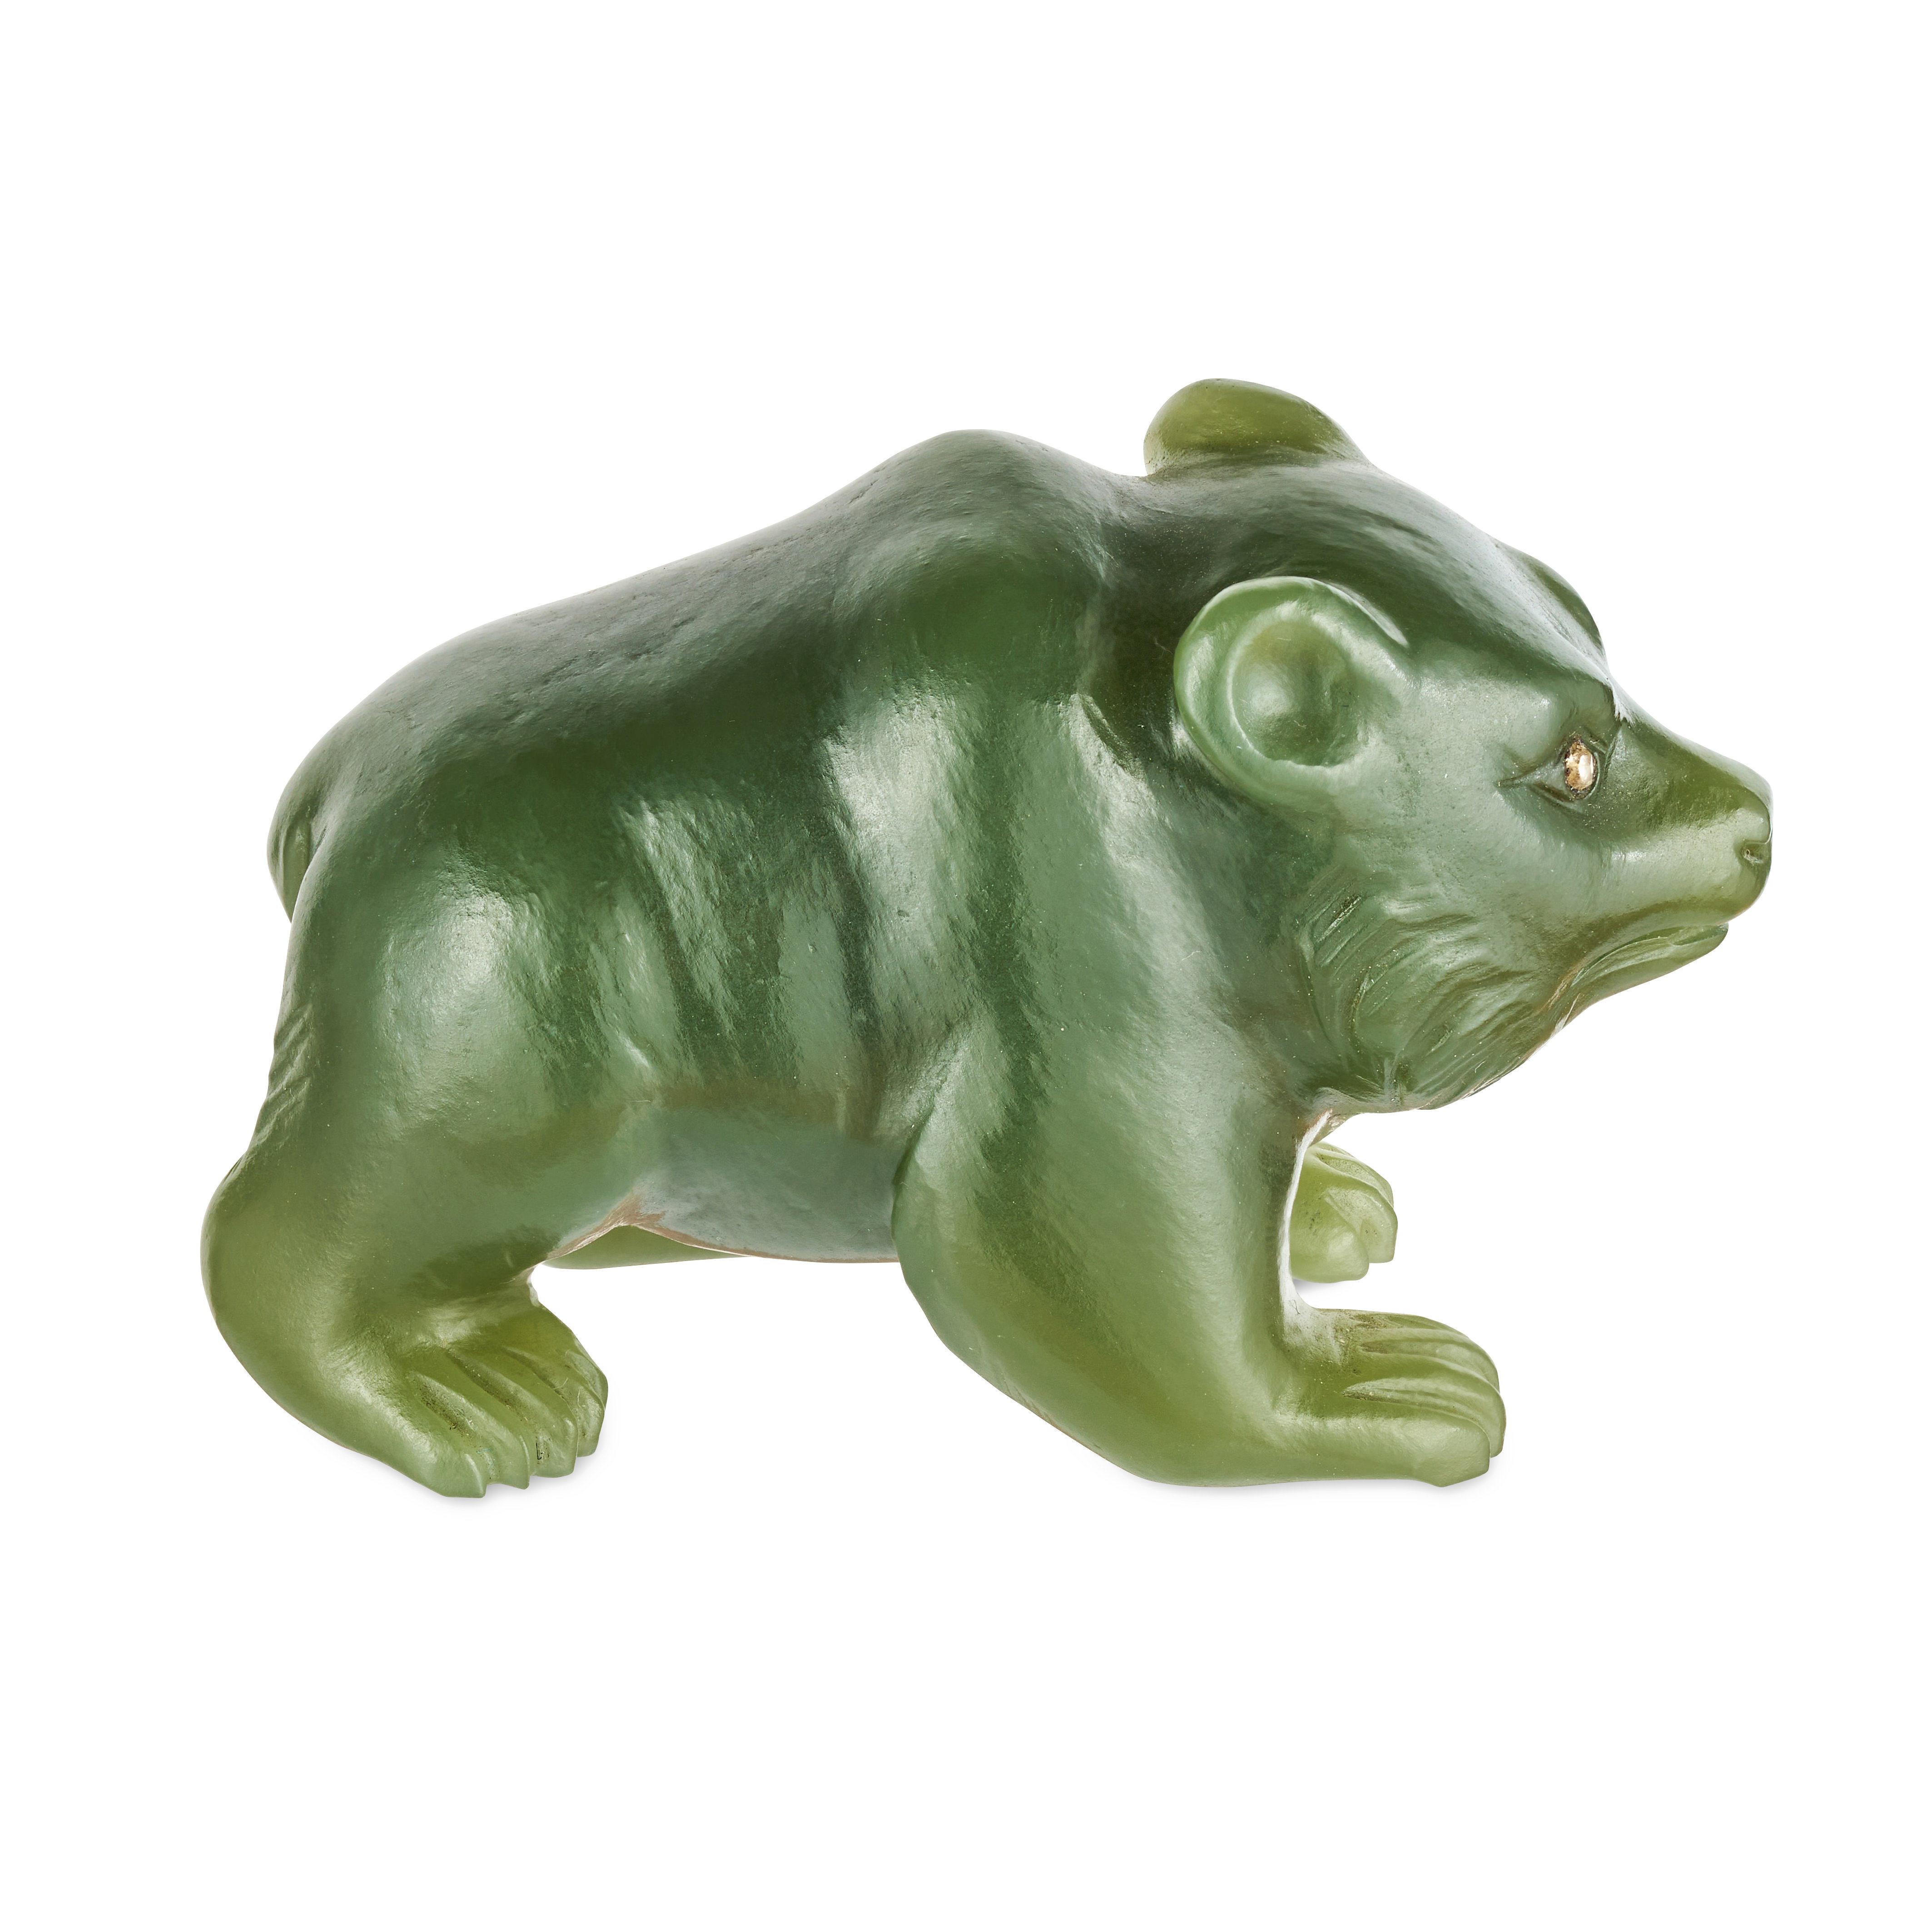 FABERGE, A JEWELLED NEPHRITE STUDY OF A BEAR, CIRCA 1905 - Image 5 of 6